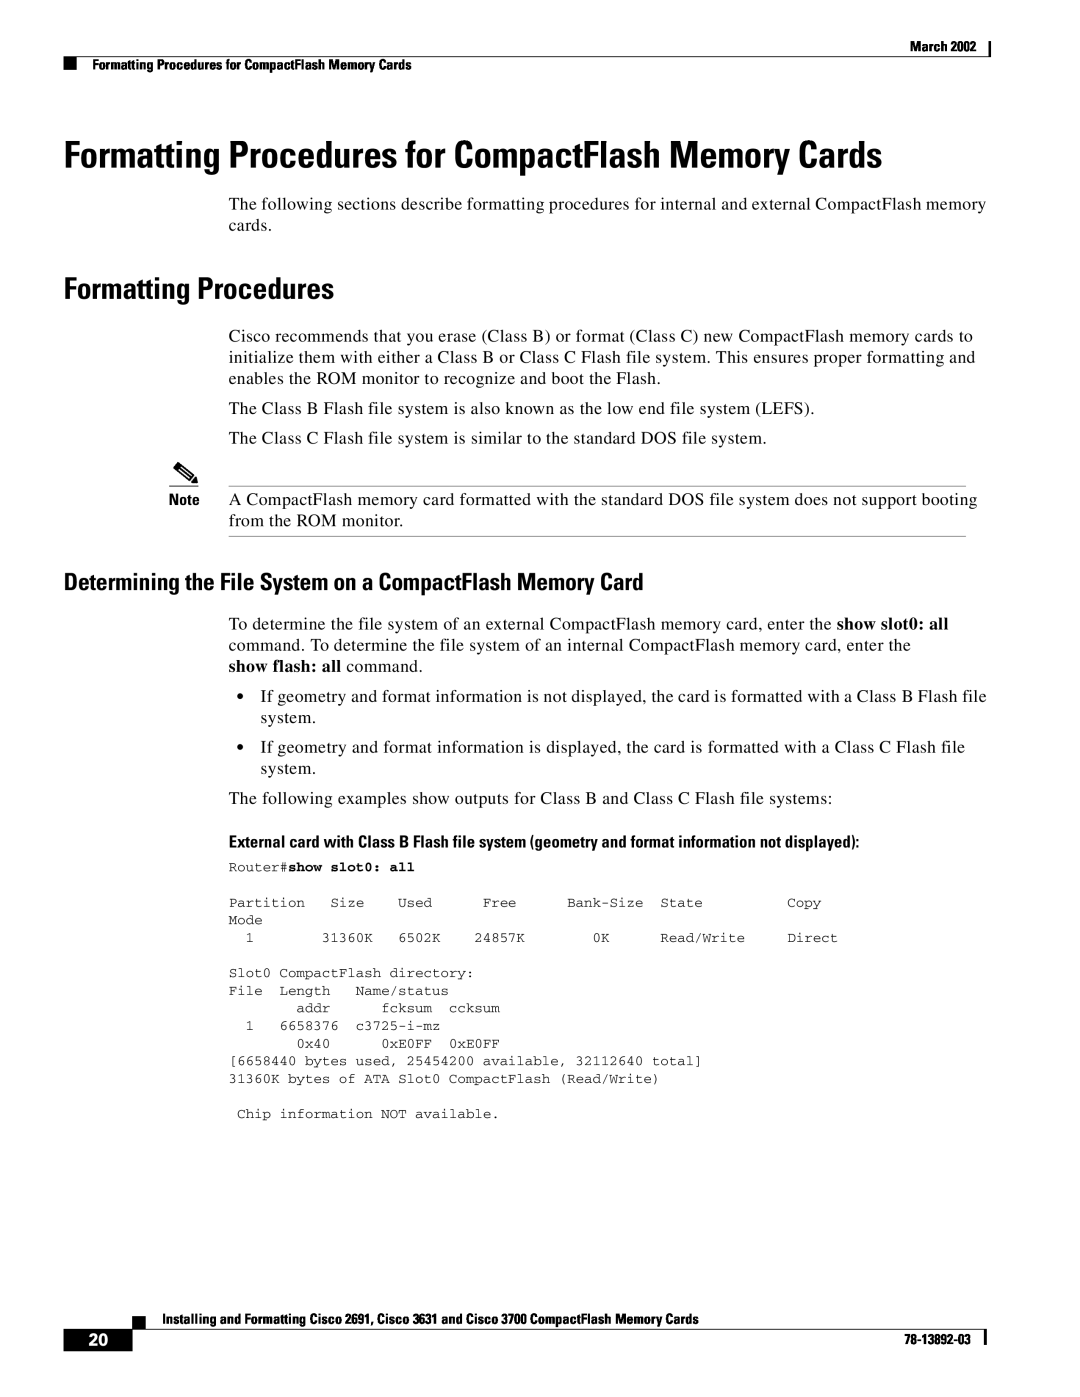 Cisco Systems 3631, 2691 manual Formatting Procedures for CompactFlash Memory Cards 